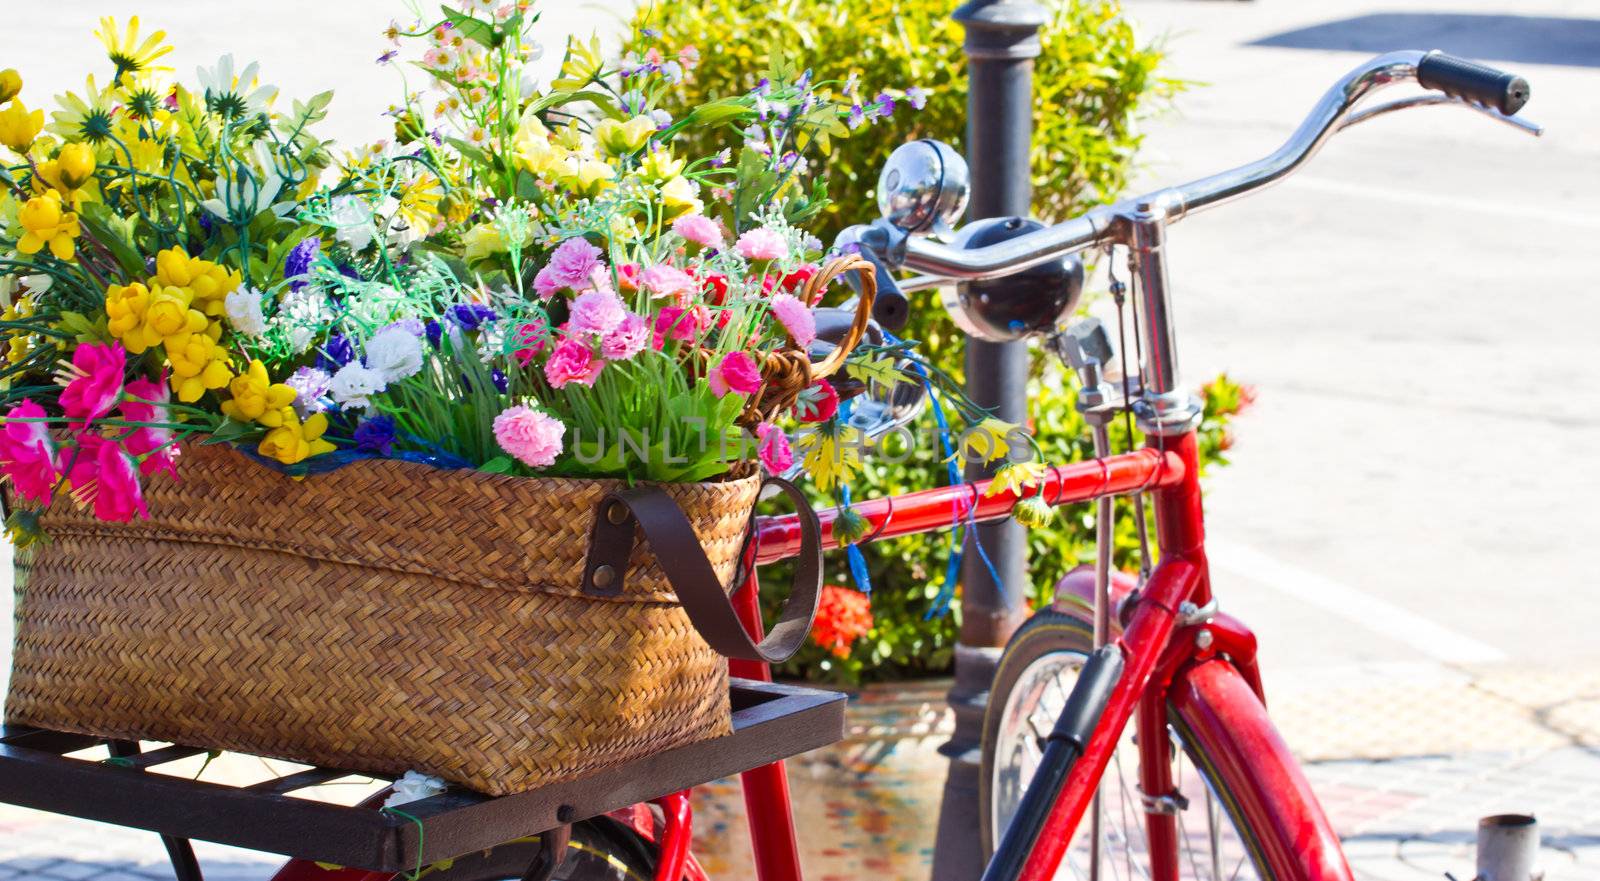 old bicycle and flowers